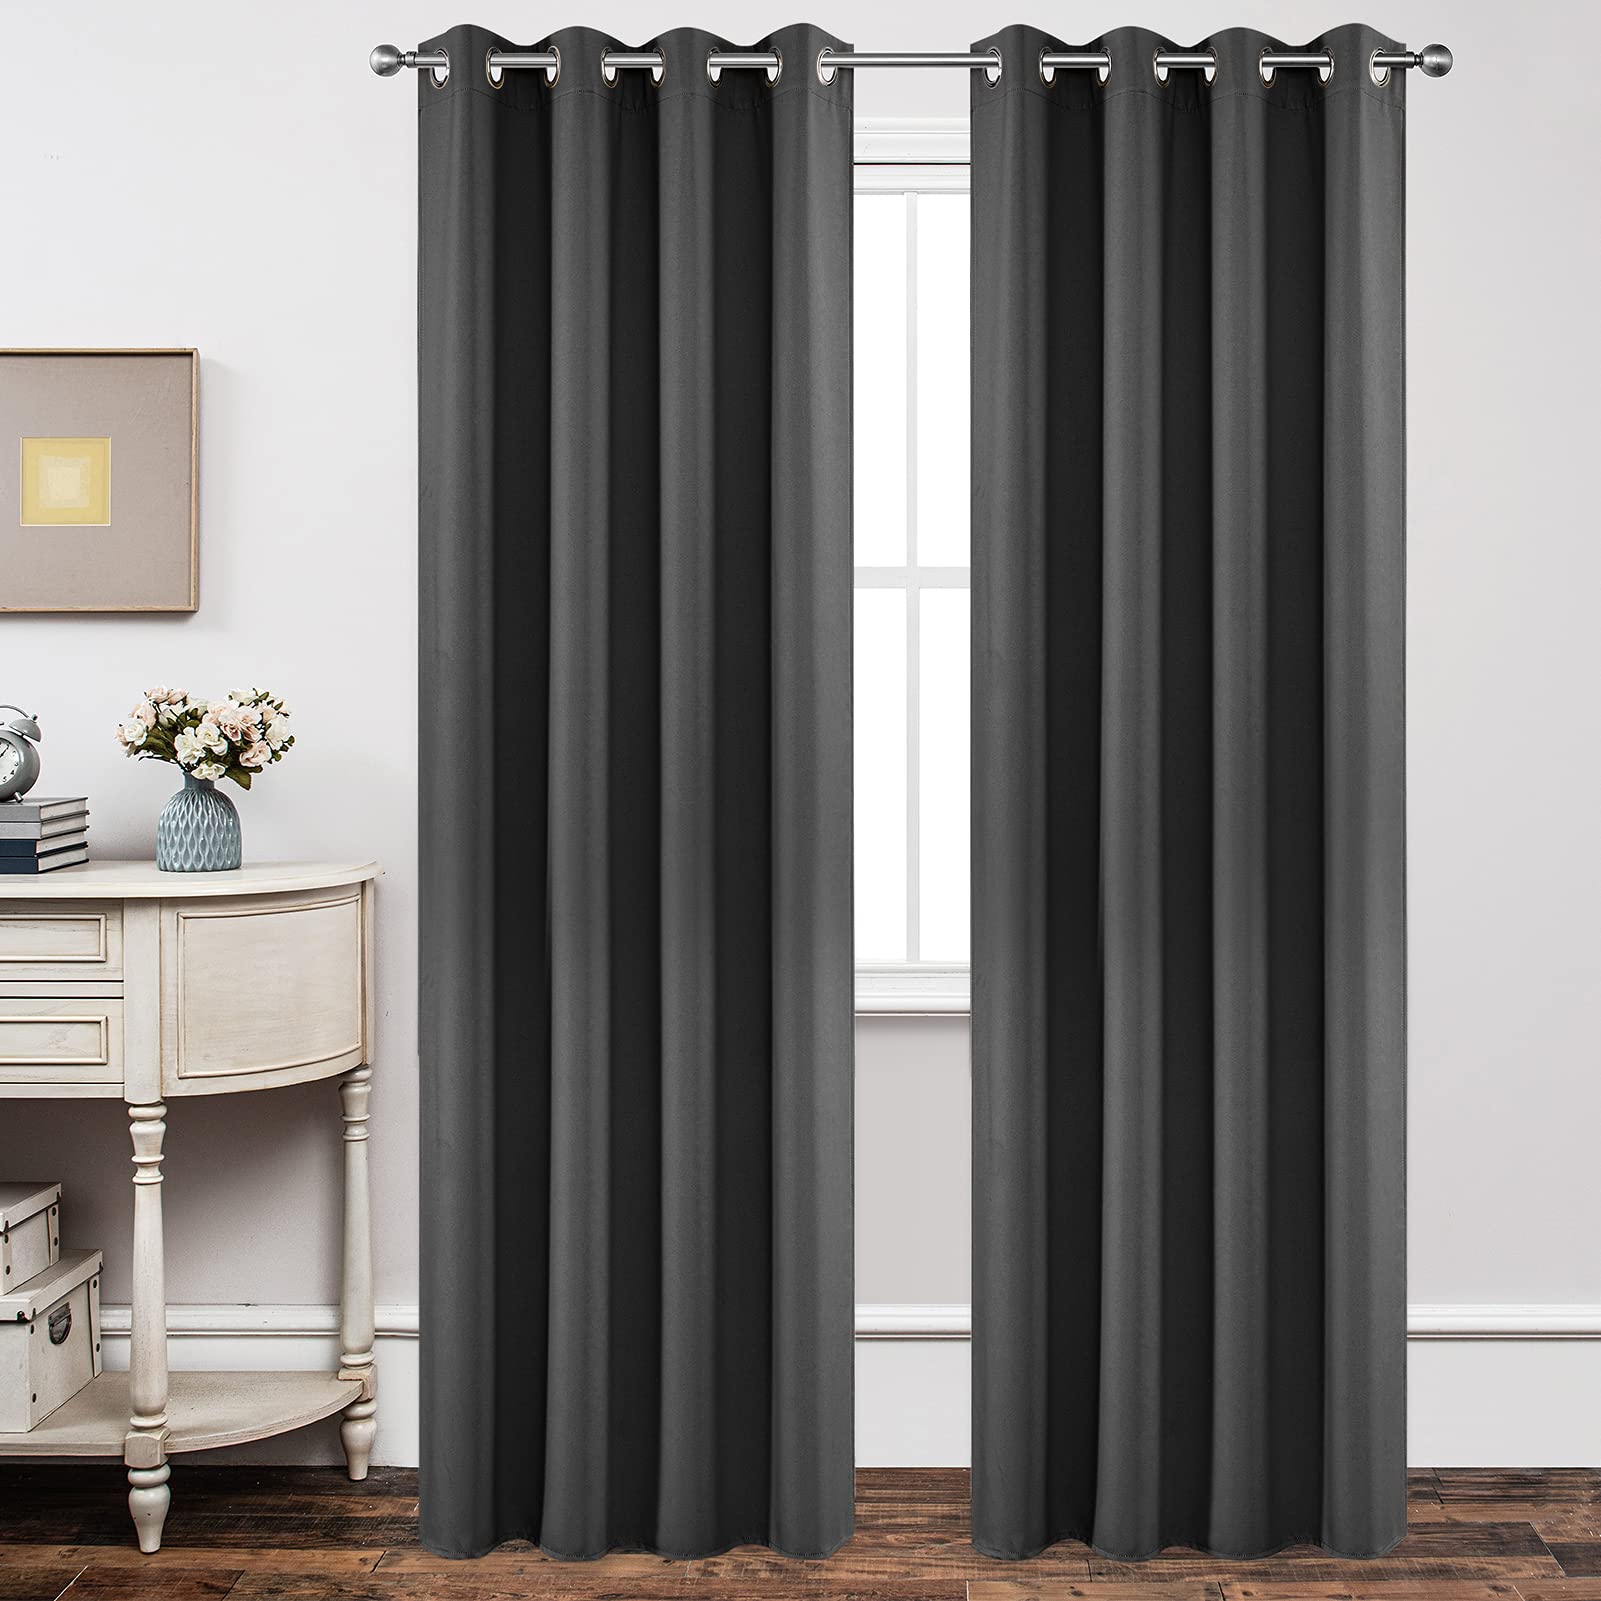 Joydeco Blackout curtains 96 Inch Length 2 Panels Set, Thermal Insulated 95 Long curtains& Drapes 2 Burg, Room Darkening grommet